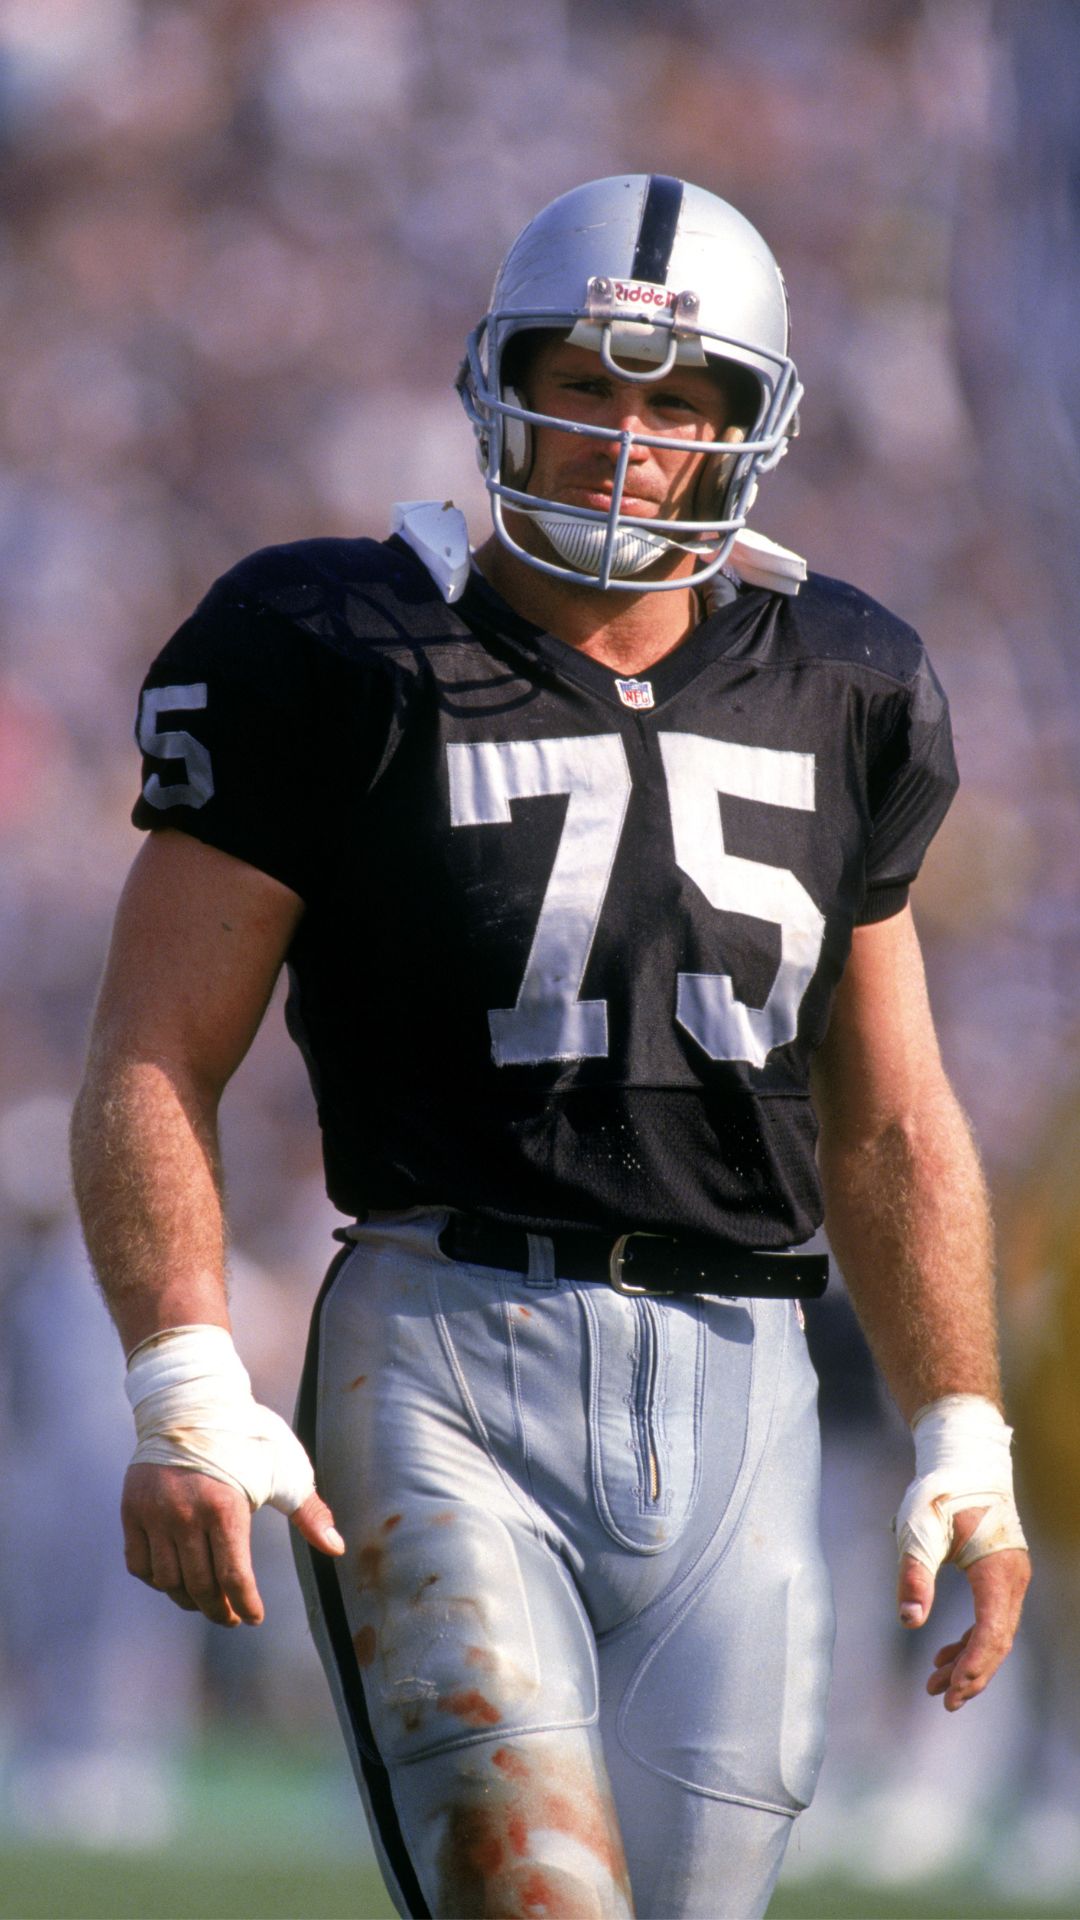 Howie Long, During His Playing Years For Oakland Raiders. (Source: Instagram)